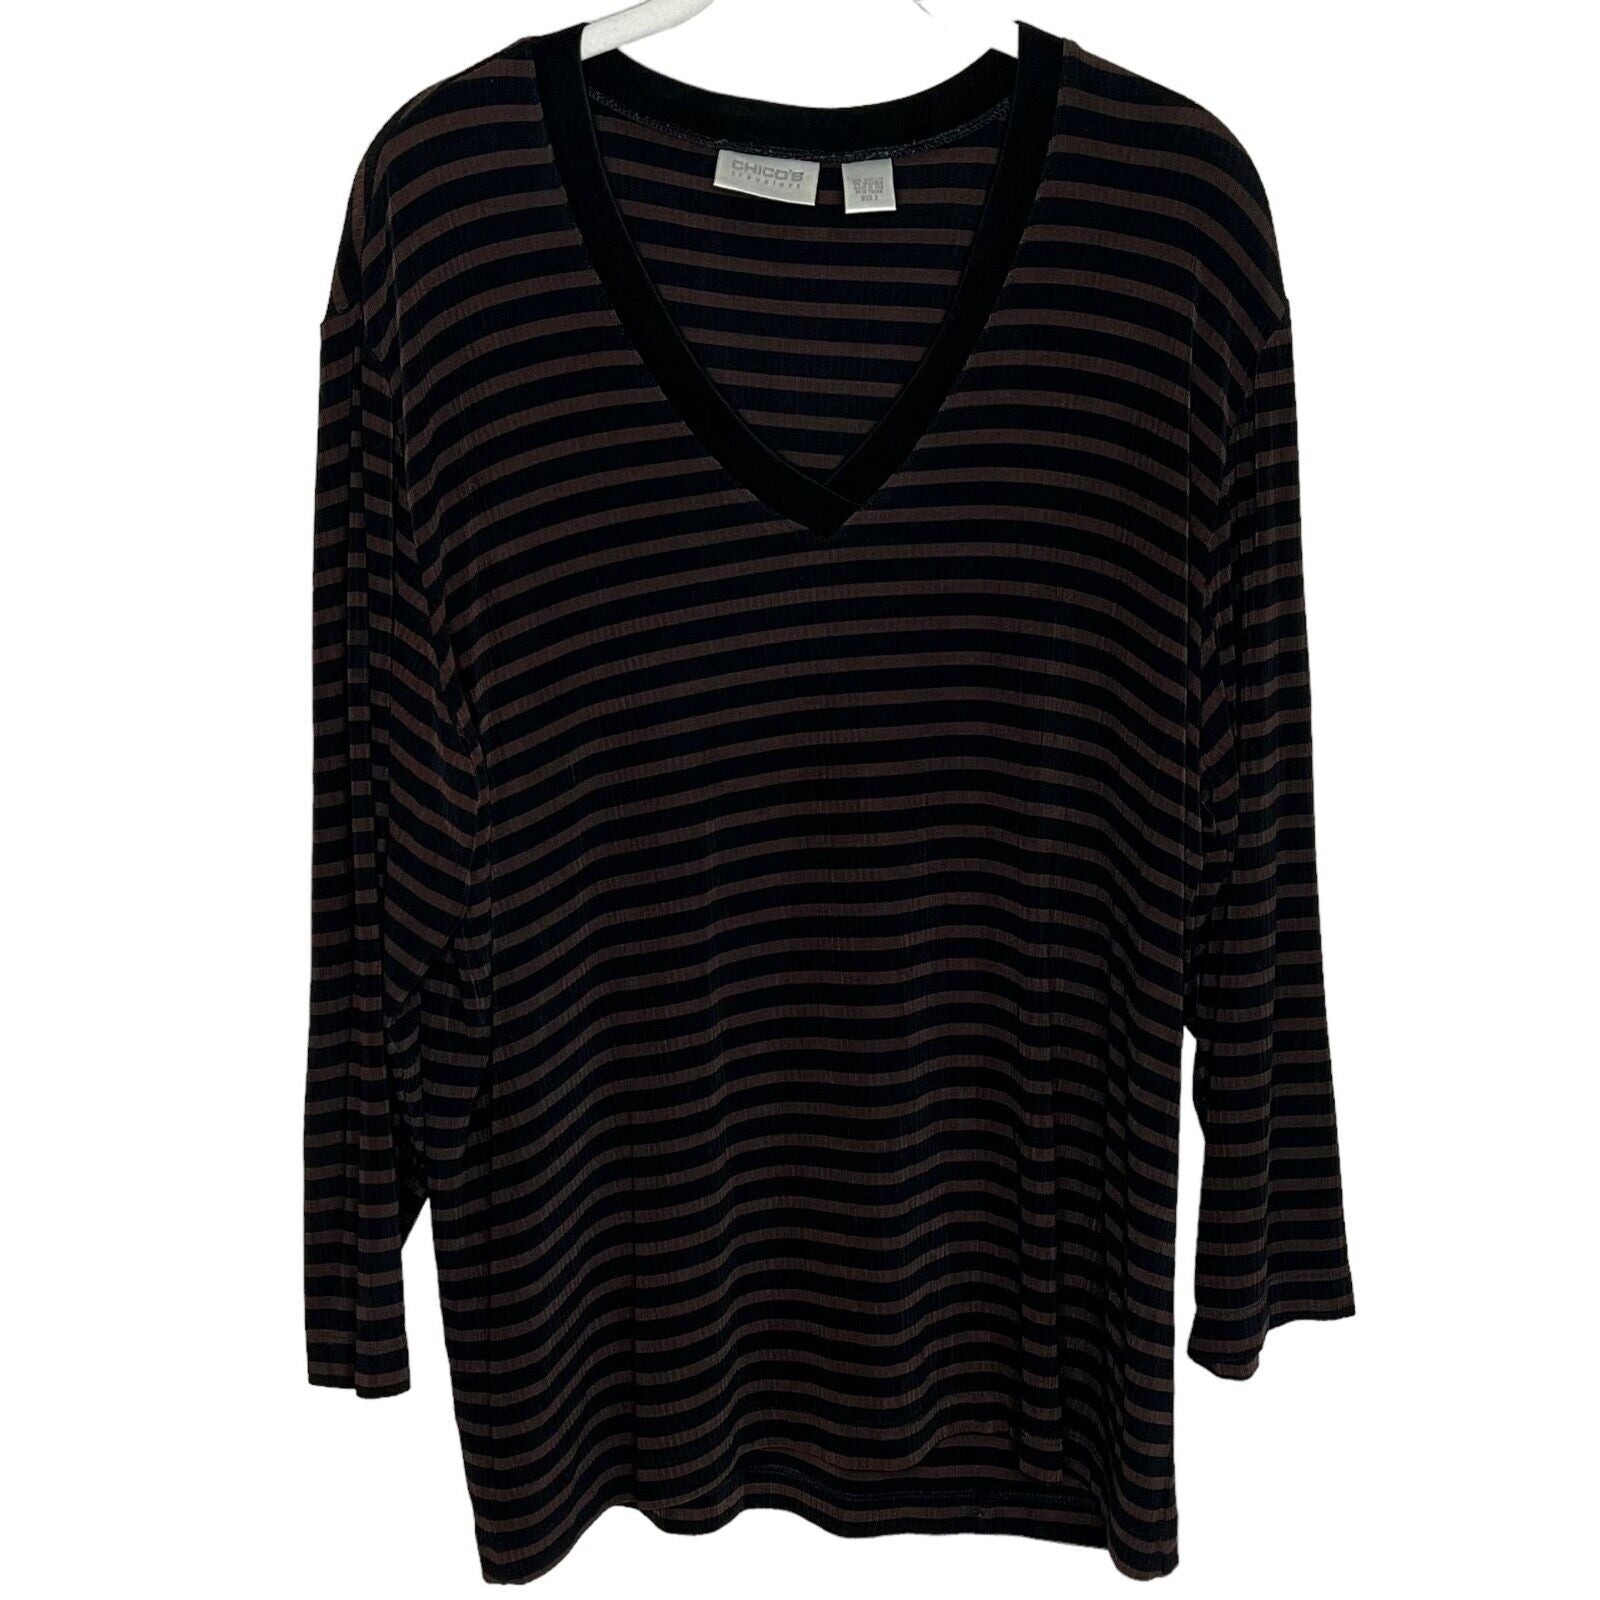 Chico's Travelers Ribbed Brown Black Striped Ribbed Jersey Top Size 3 (Large)